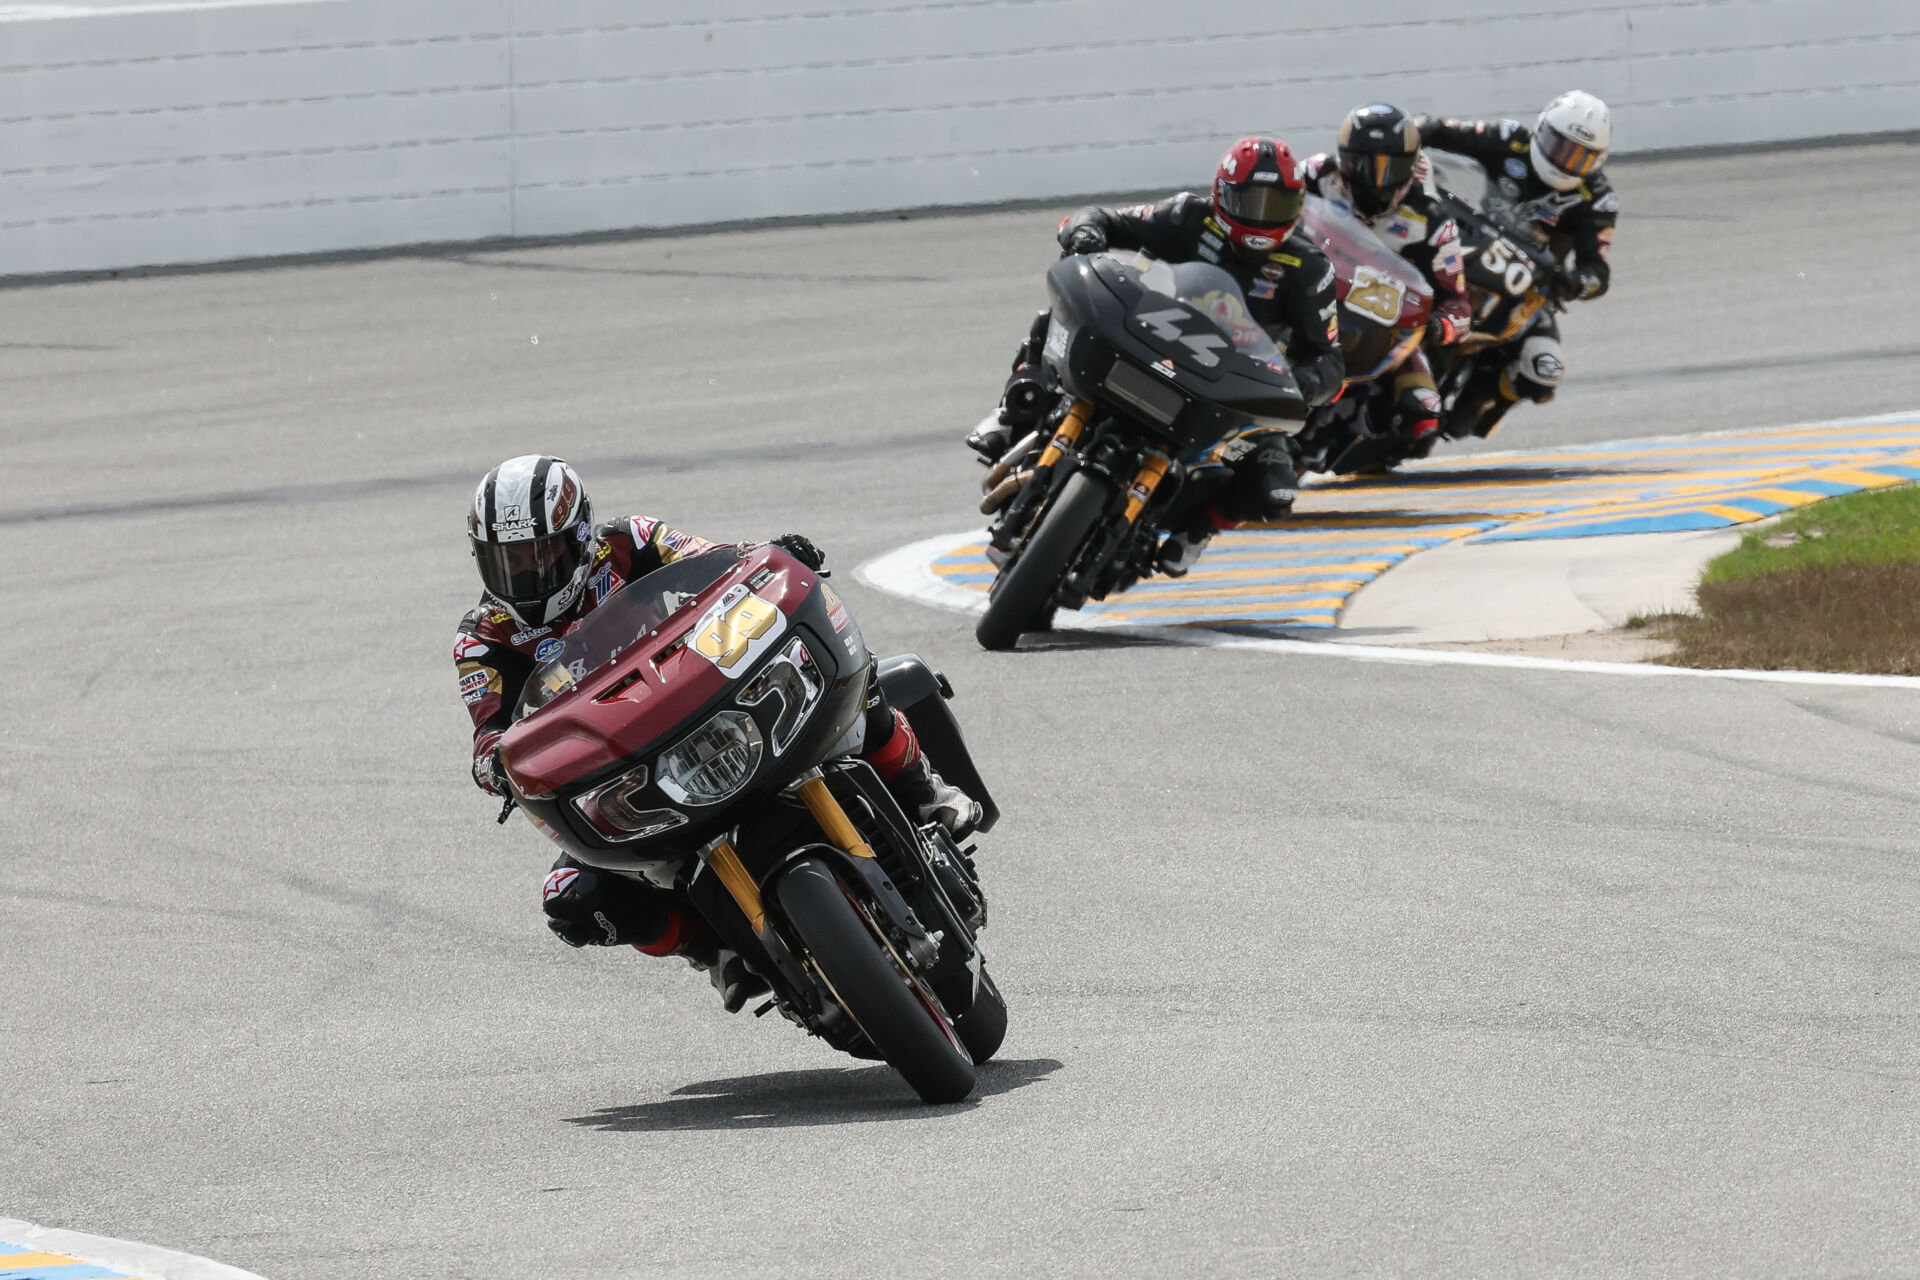 Jeremy McWilliams (99) leads James Rispoli (43), Tyler O'Hara (29) and Bobby Fong (50) in King Of The Baggers Race Two at Daytona. Photo courtesy Indian Motorcycle.